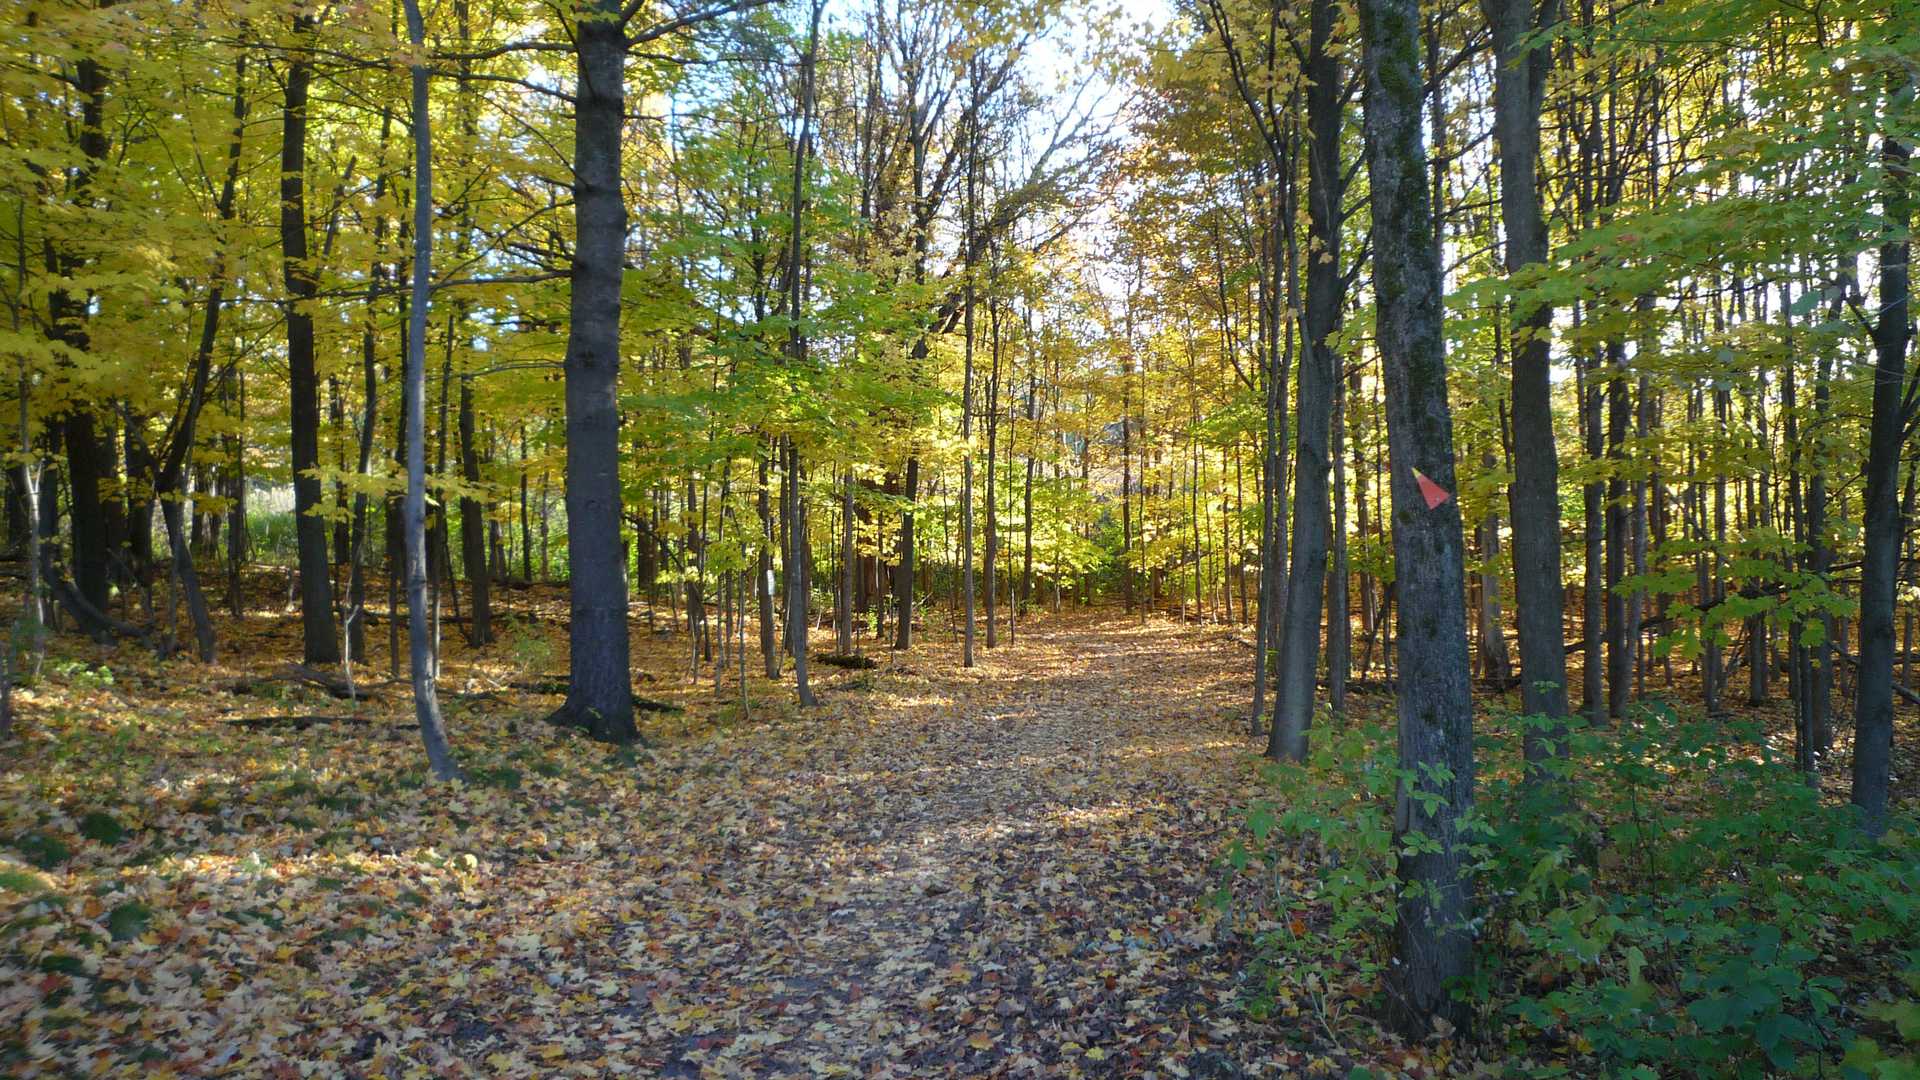 banner image: a leaf-strewn path in a bright forest